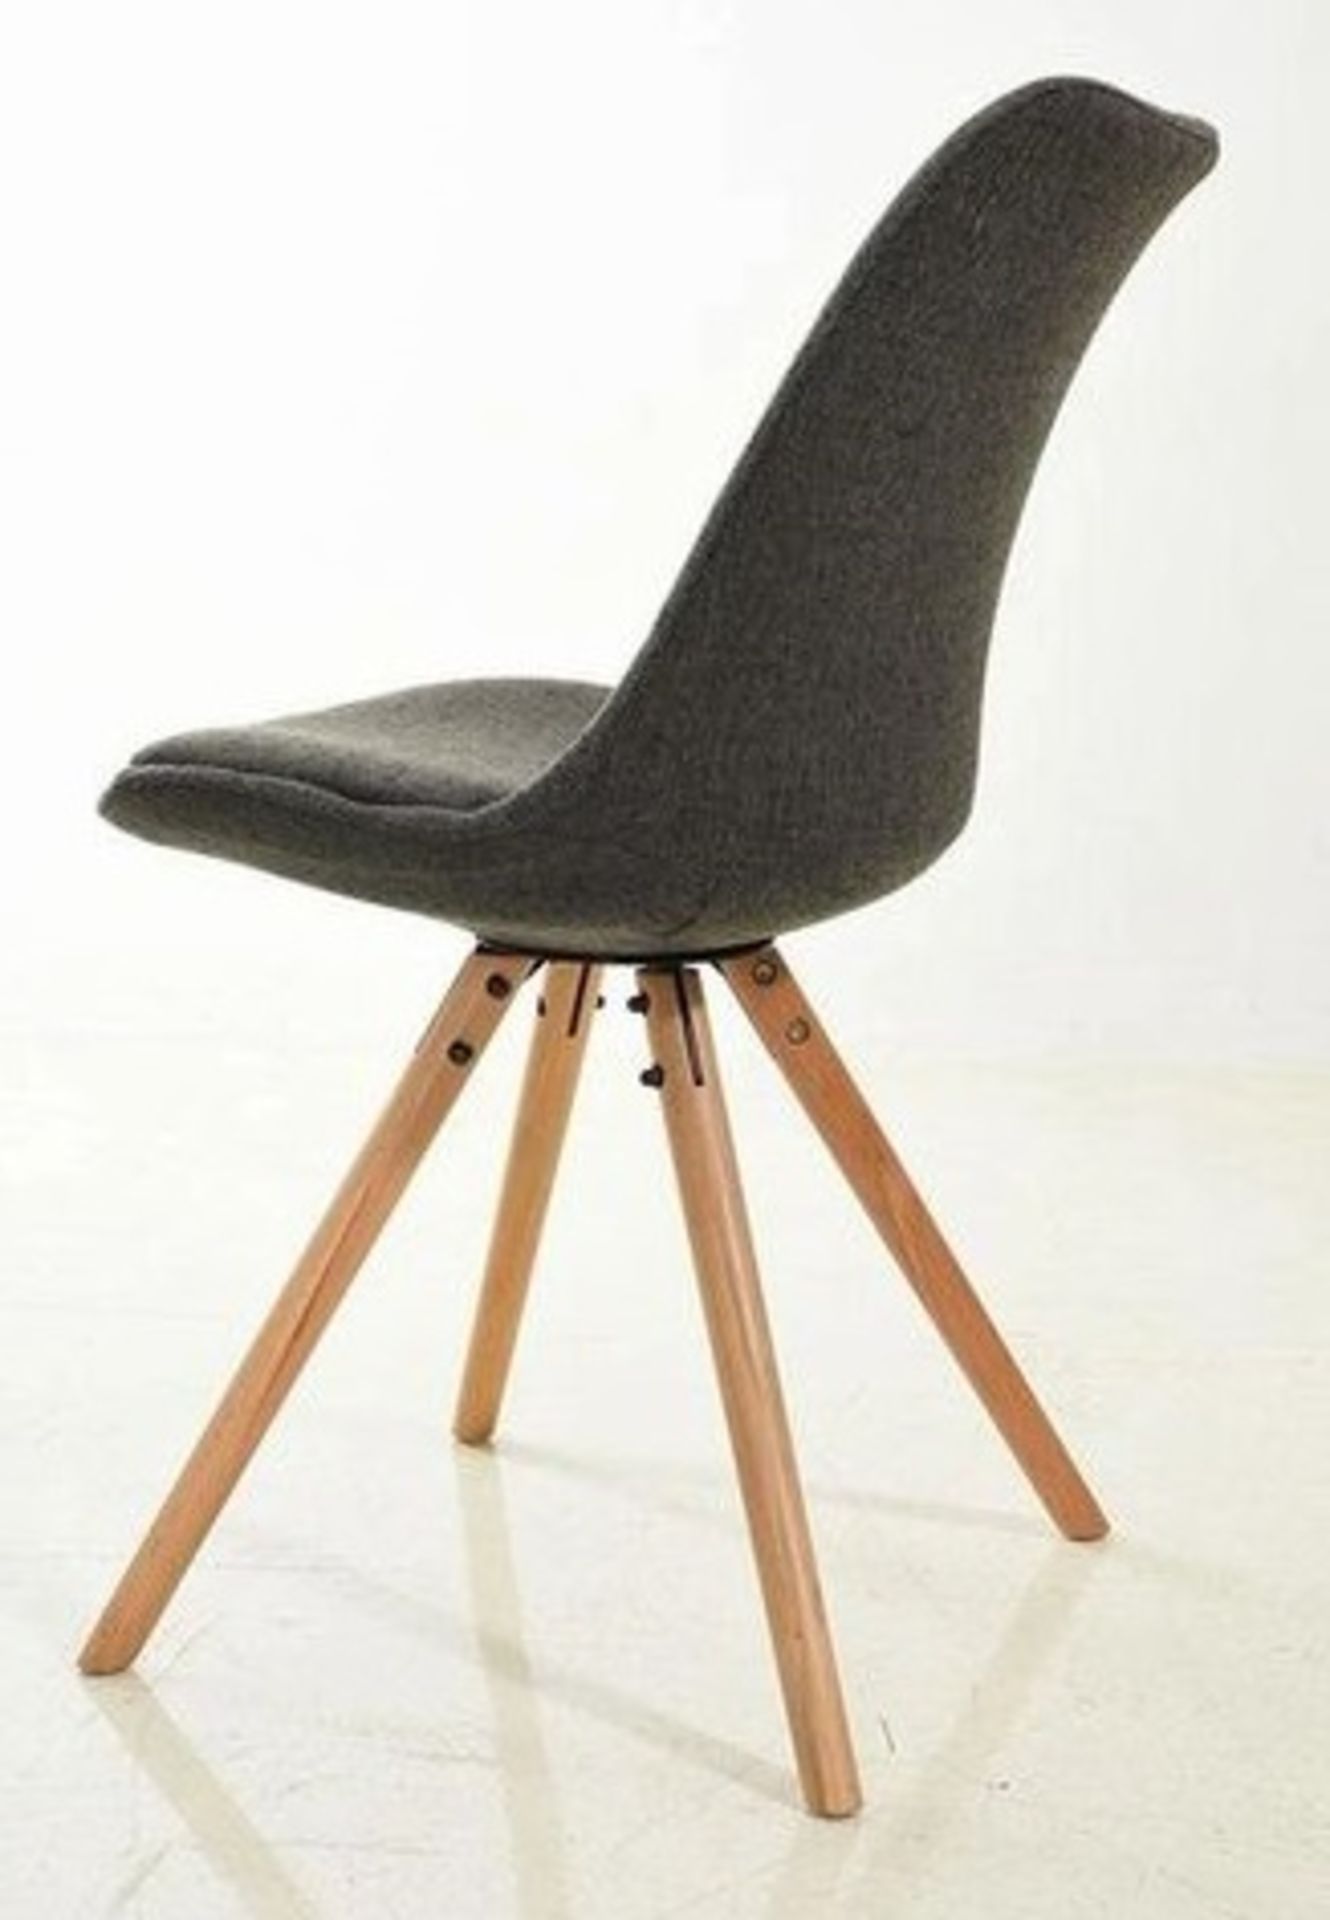 Set of 4 x 'TURNER' Contemporary Scandinavian-style Upholstered Dining Chairs in Grey - Mid - Image 2 of 3